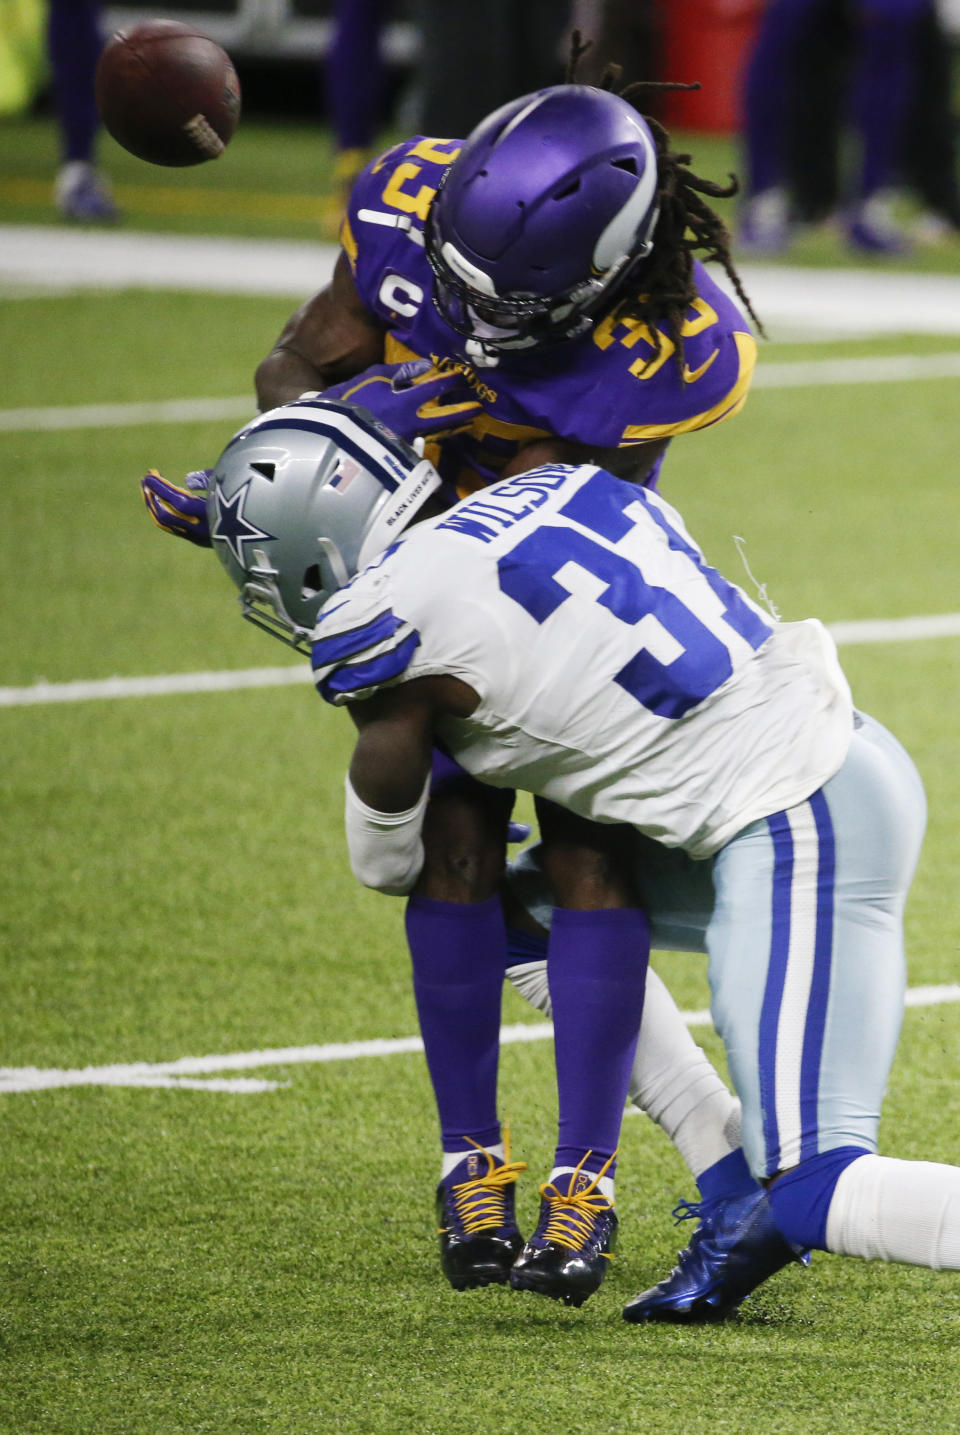 Minnesota Vikings running back Dalvin Cook (33) fumbles as he is hit by Dallas Cowboys safety Donovan Wilson (37) during the first half of an NFL football game, Sunday, Nov. 22, 2020, in Minneapolis. (AP Photo/Bruce Kluckhohn)